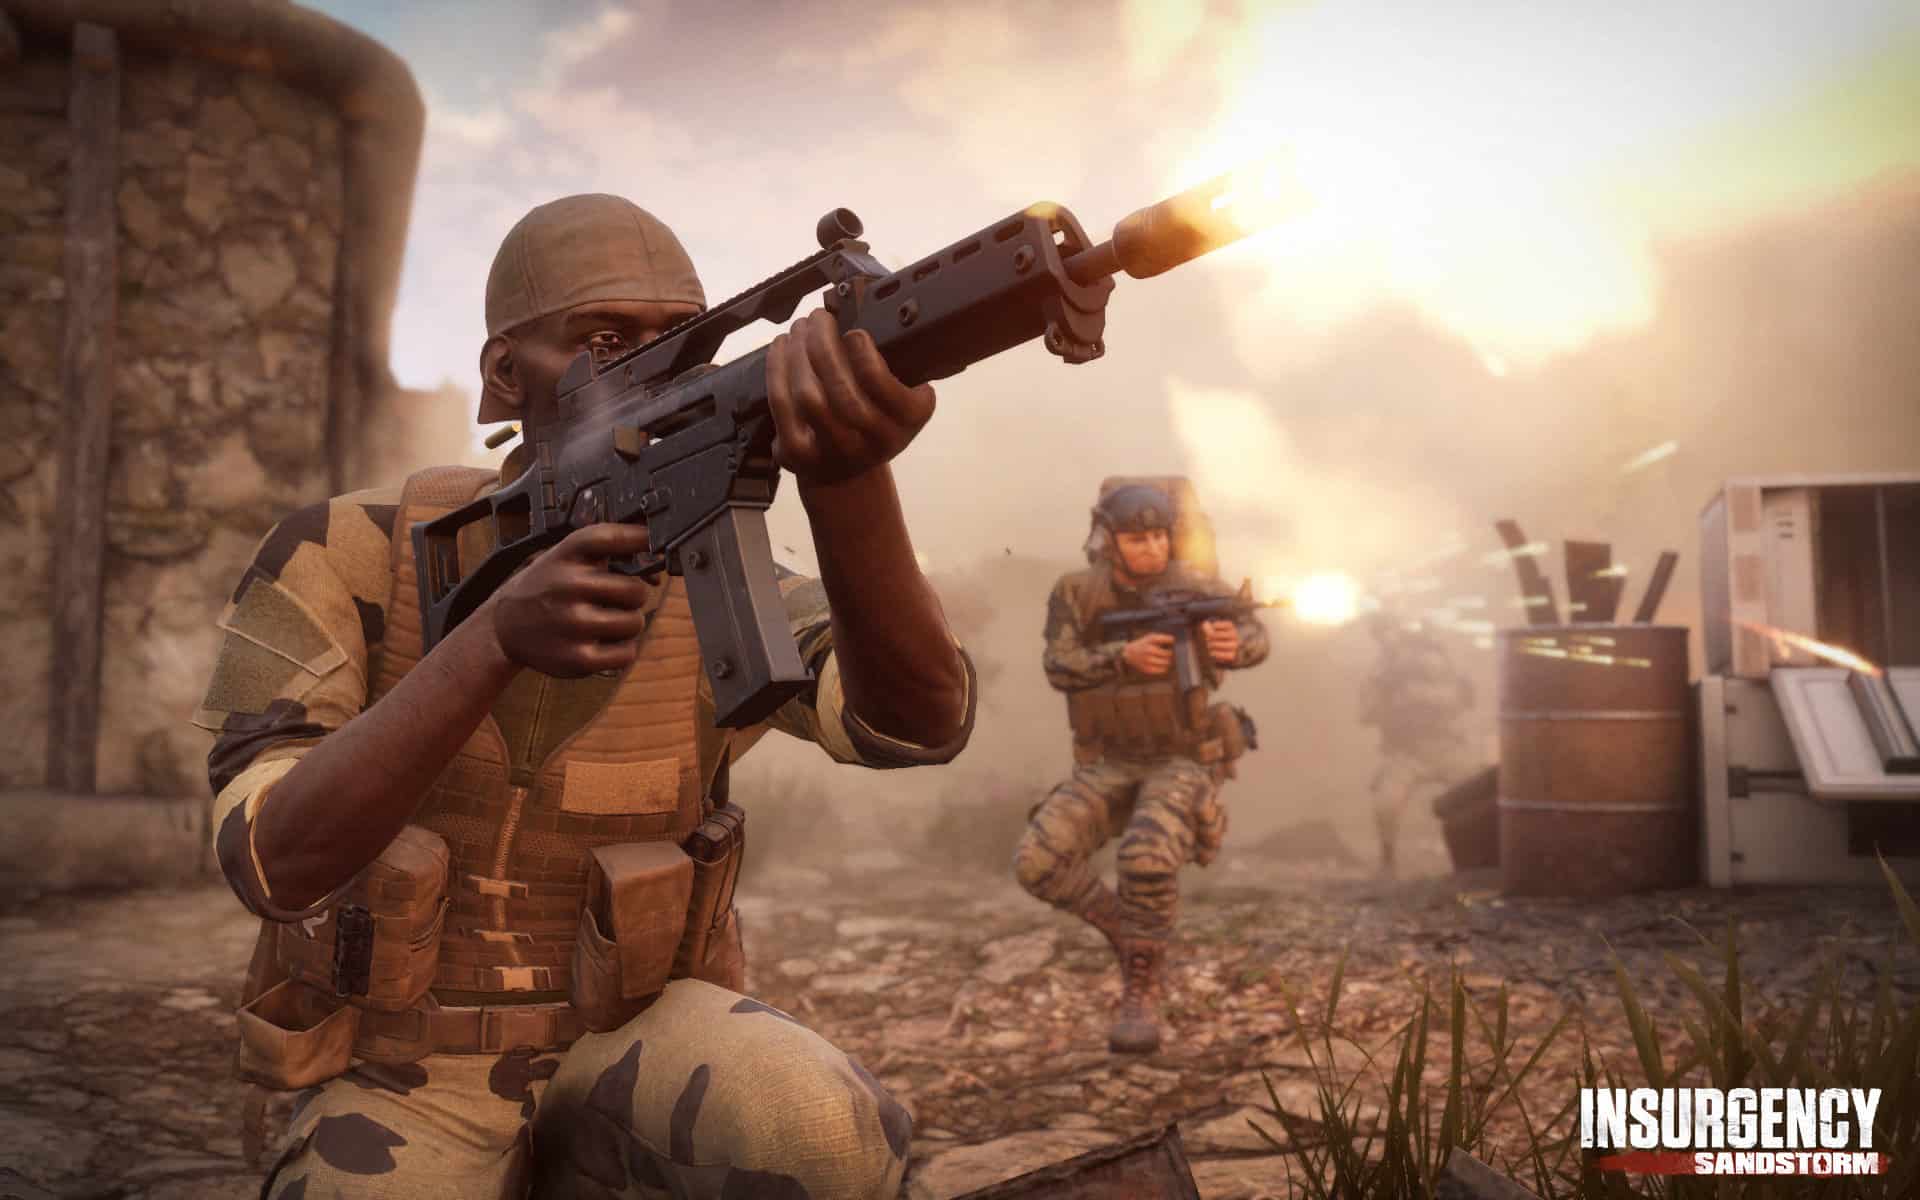 Insurgency: Sandstorm gets a boots on the ground console launch trailer